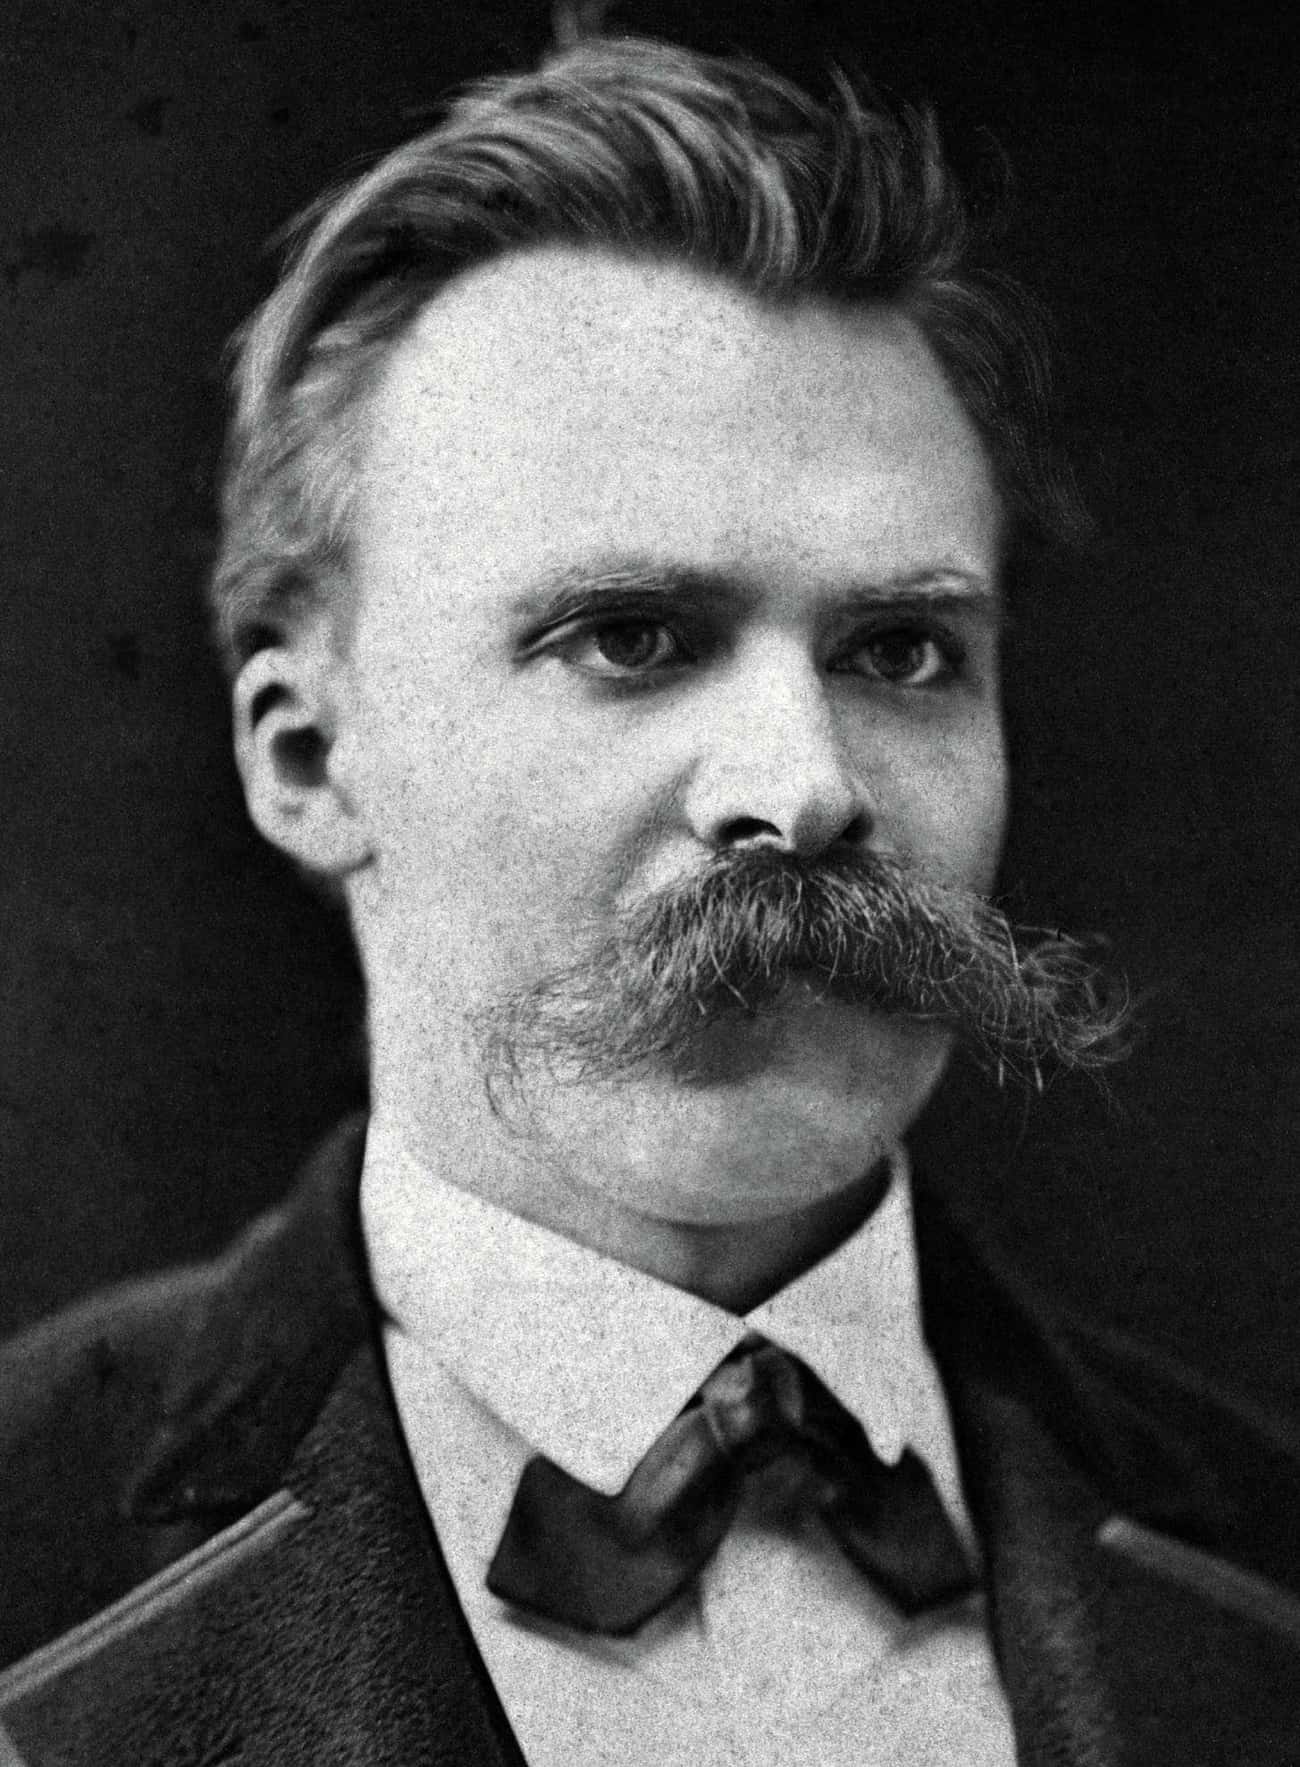 Nietzsche Retired In His Thirties And Lived Out Of A Suitcase